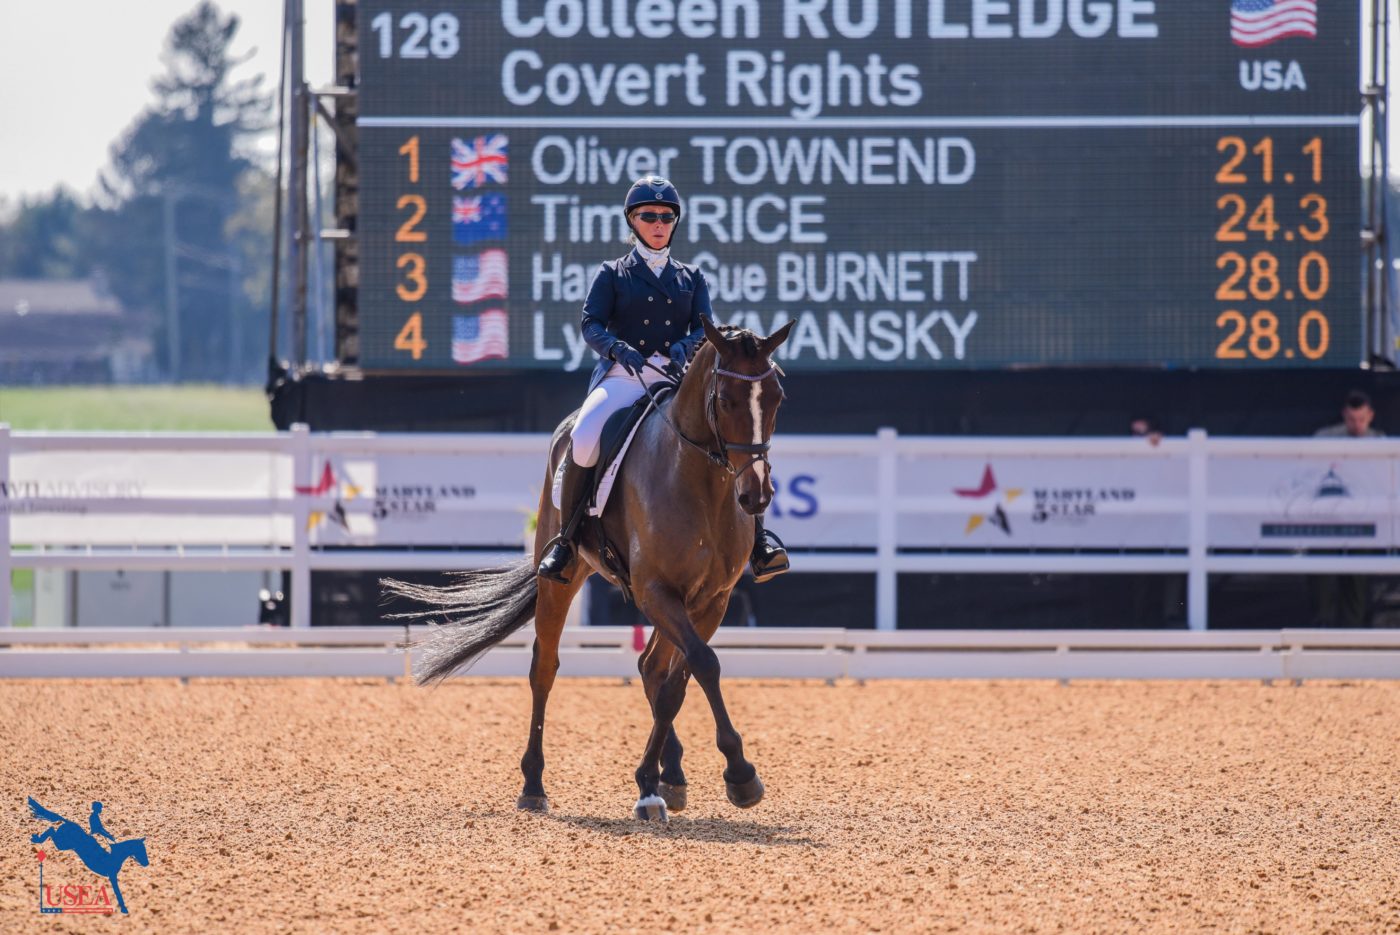 13th - Colleen Rutledge and Covert Rights